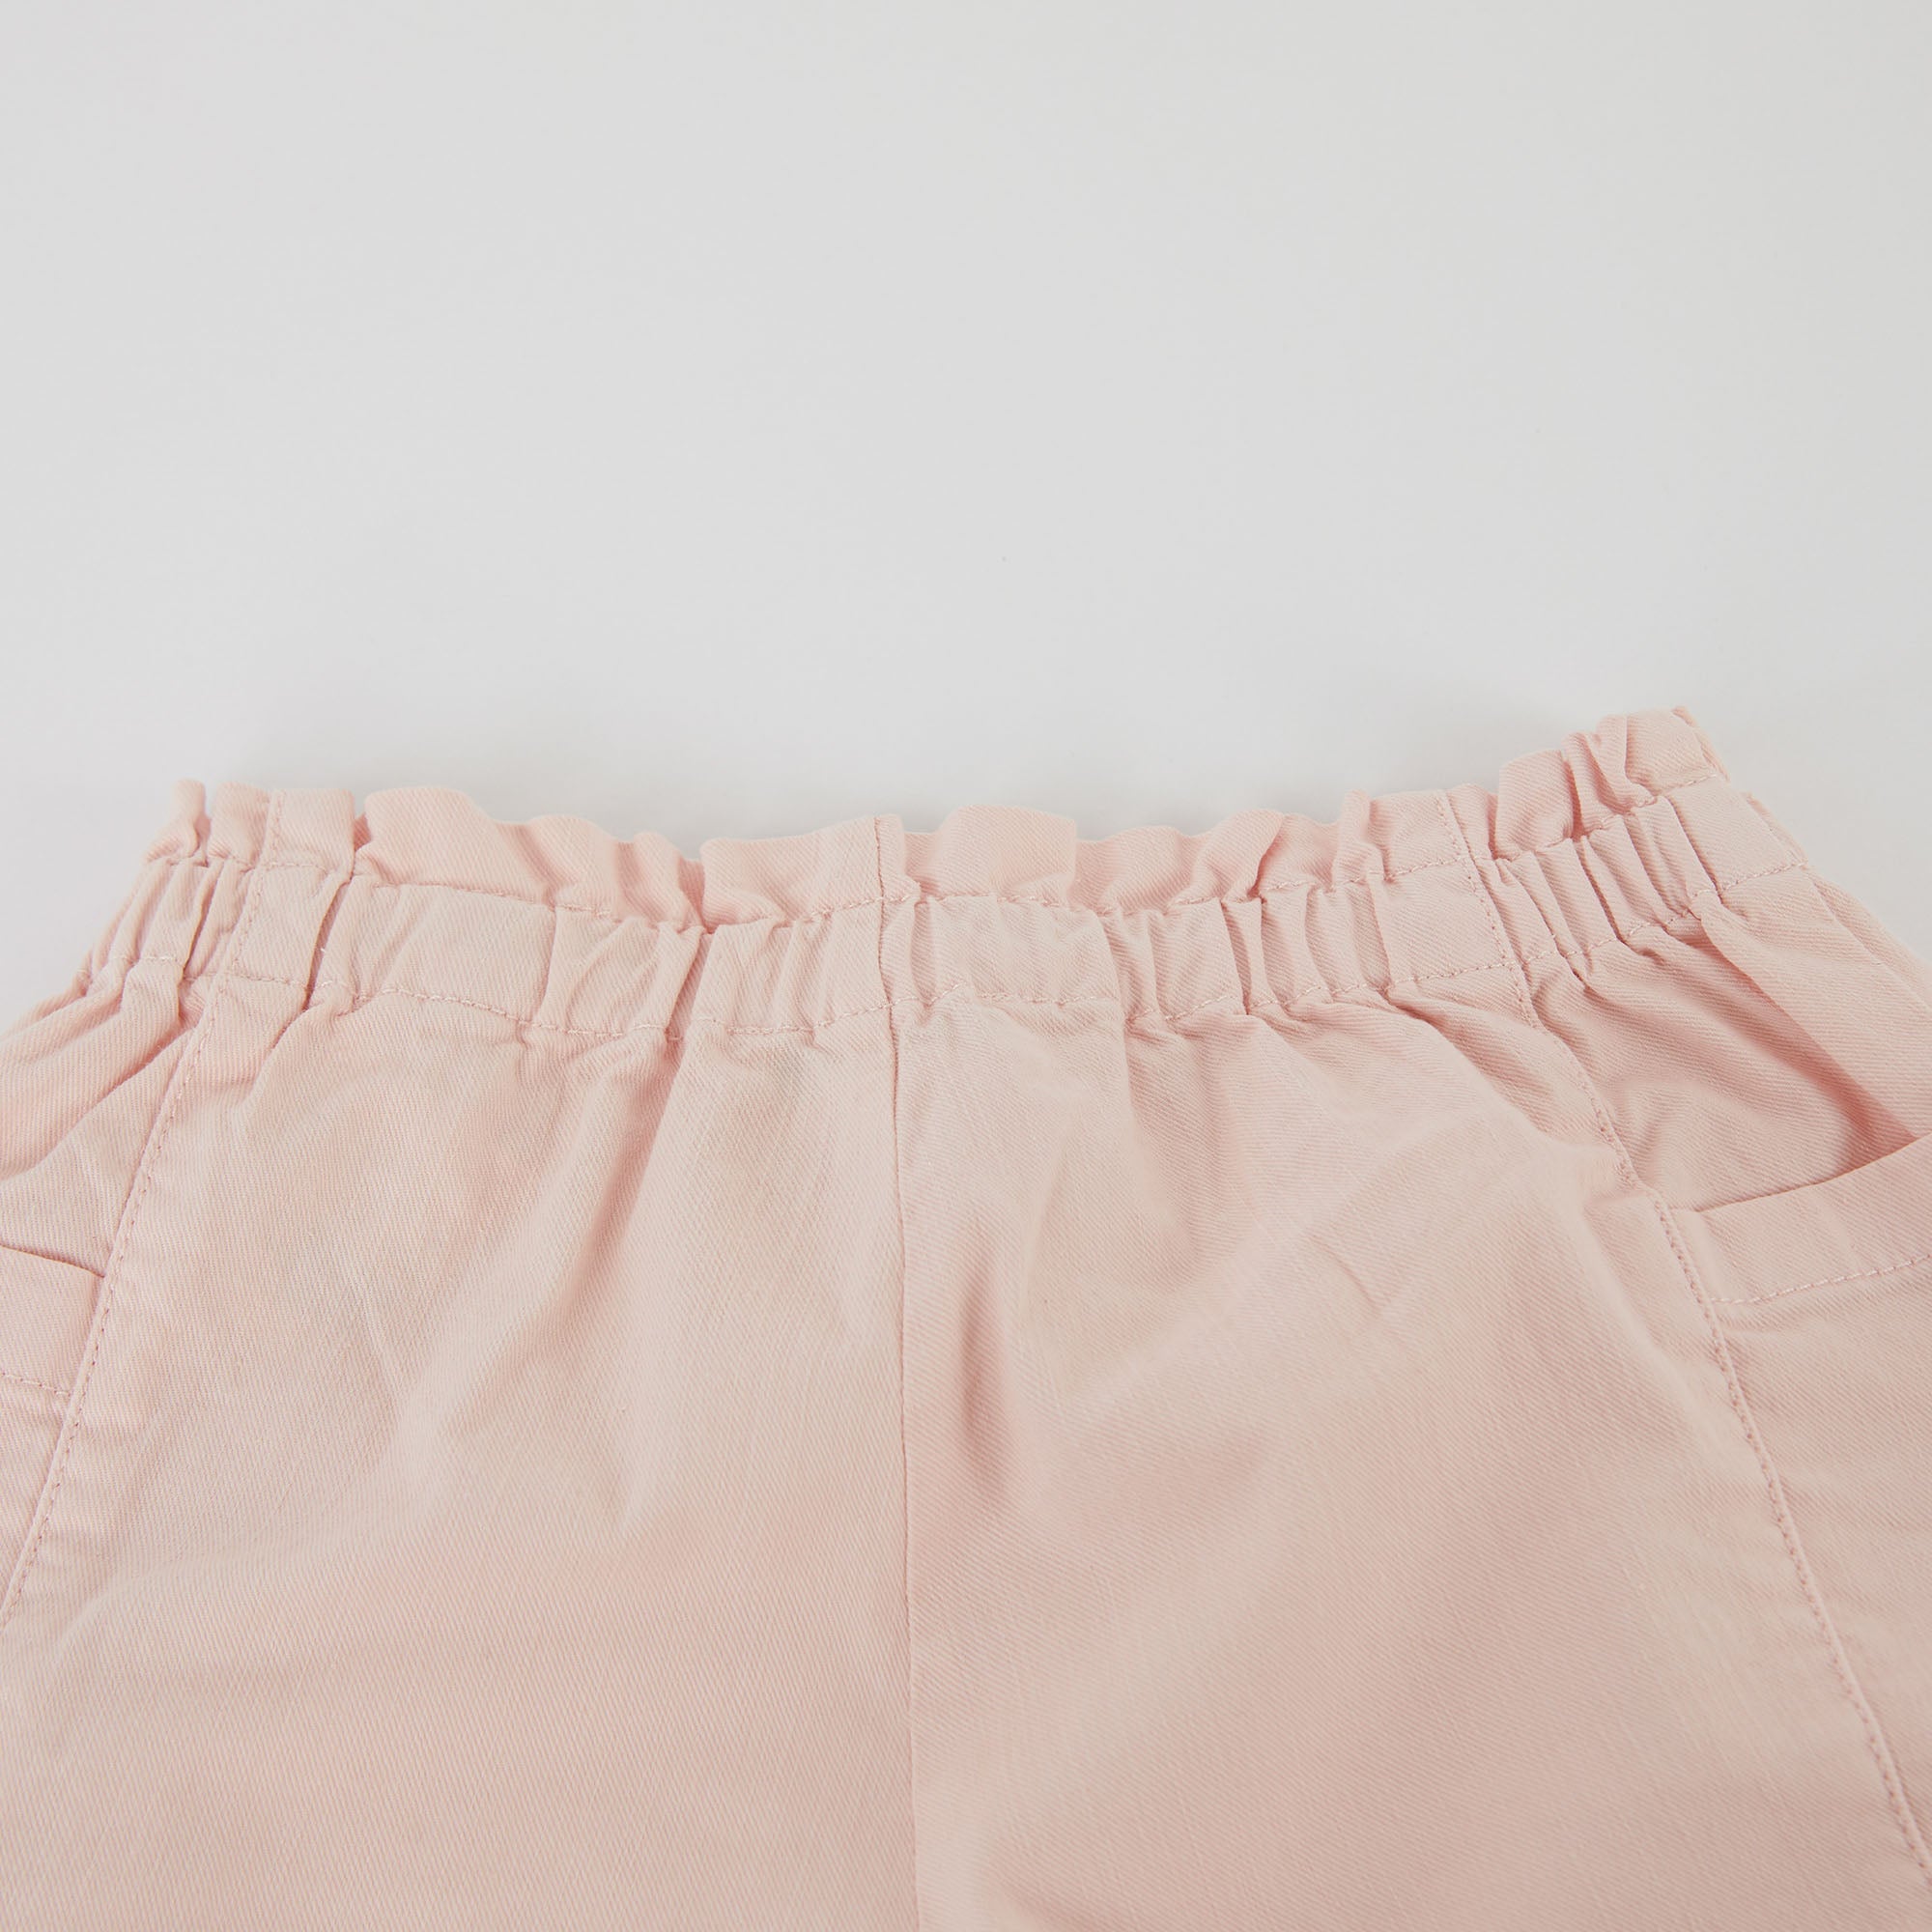 Girls Pink Cotton Trousers